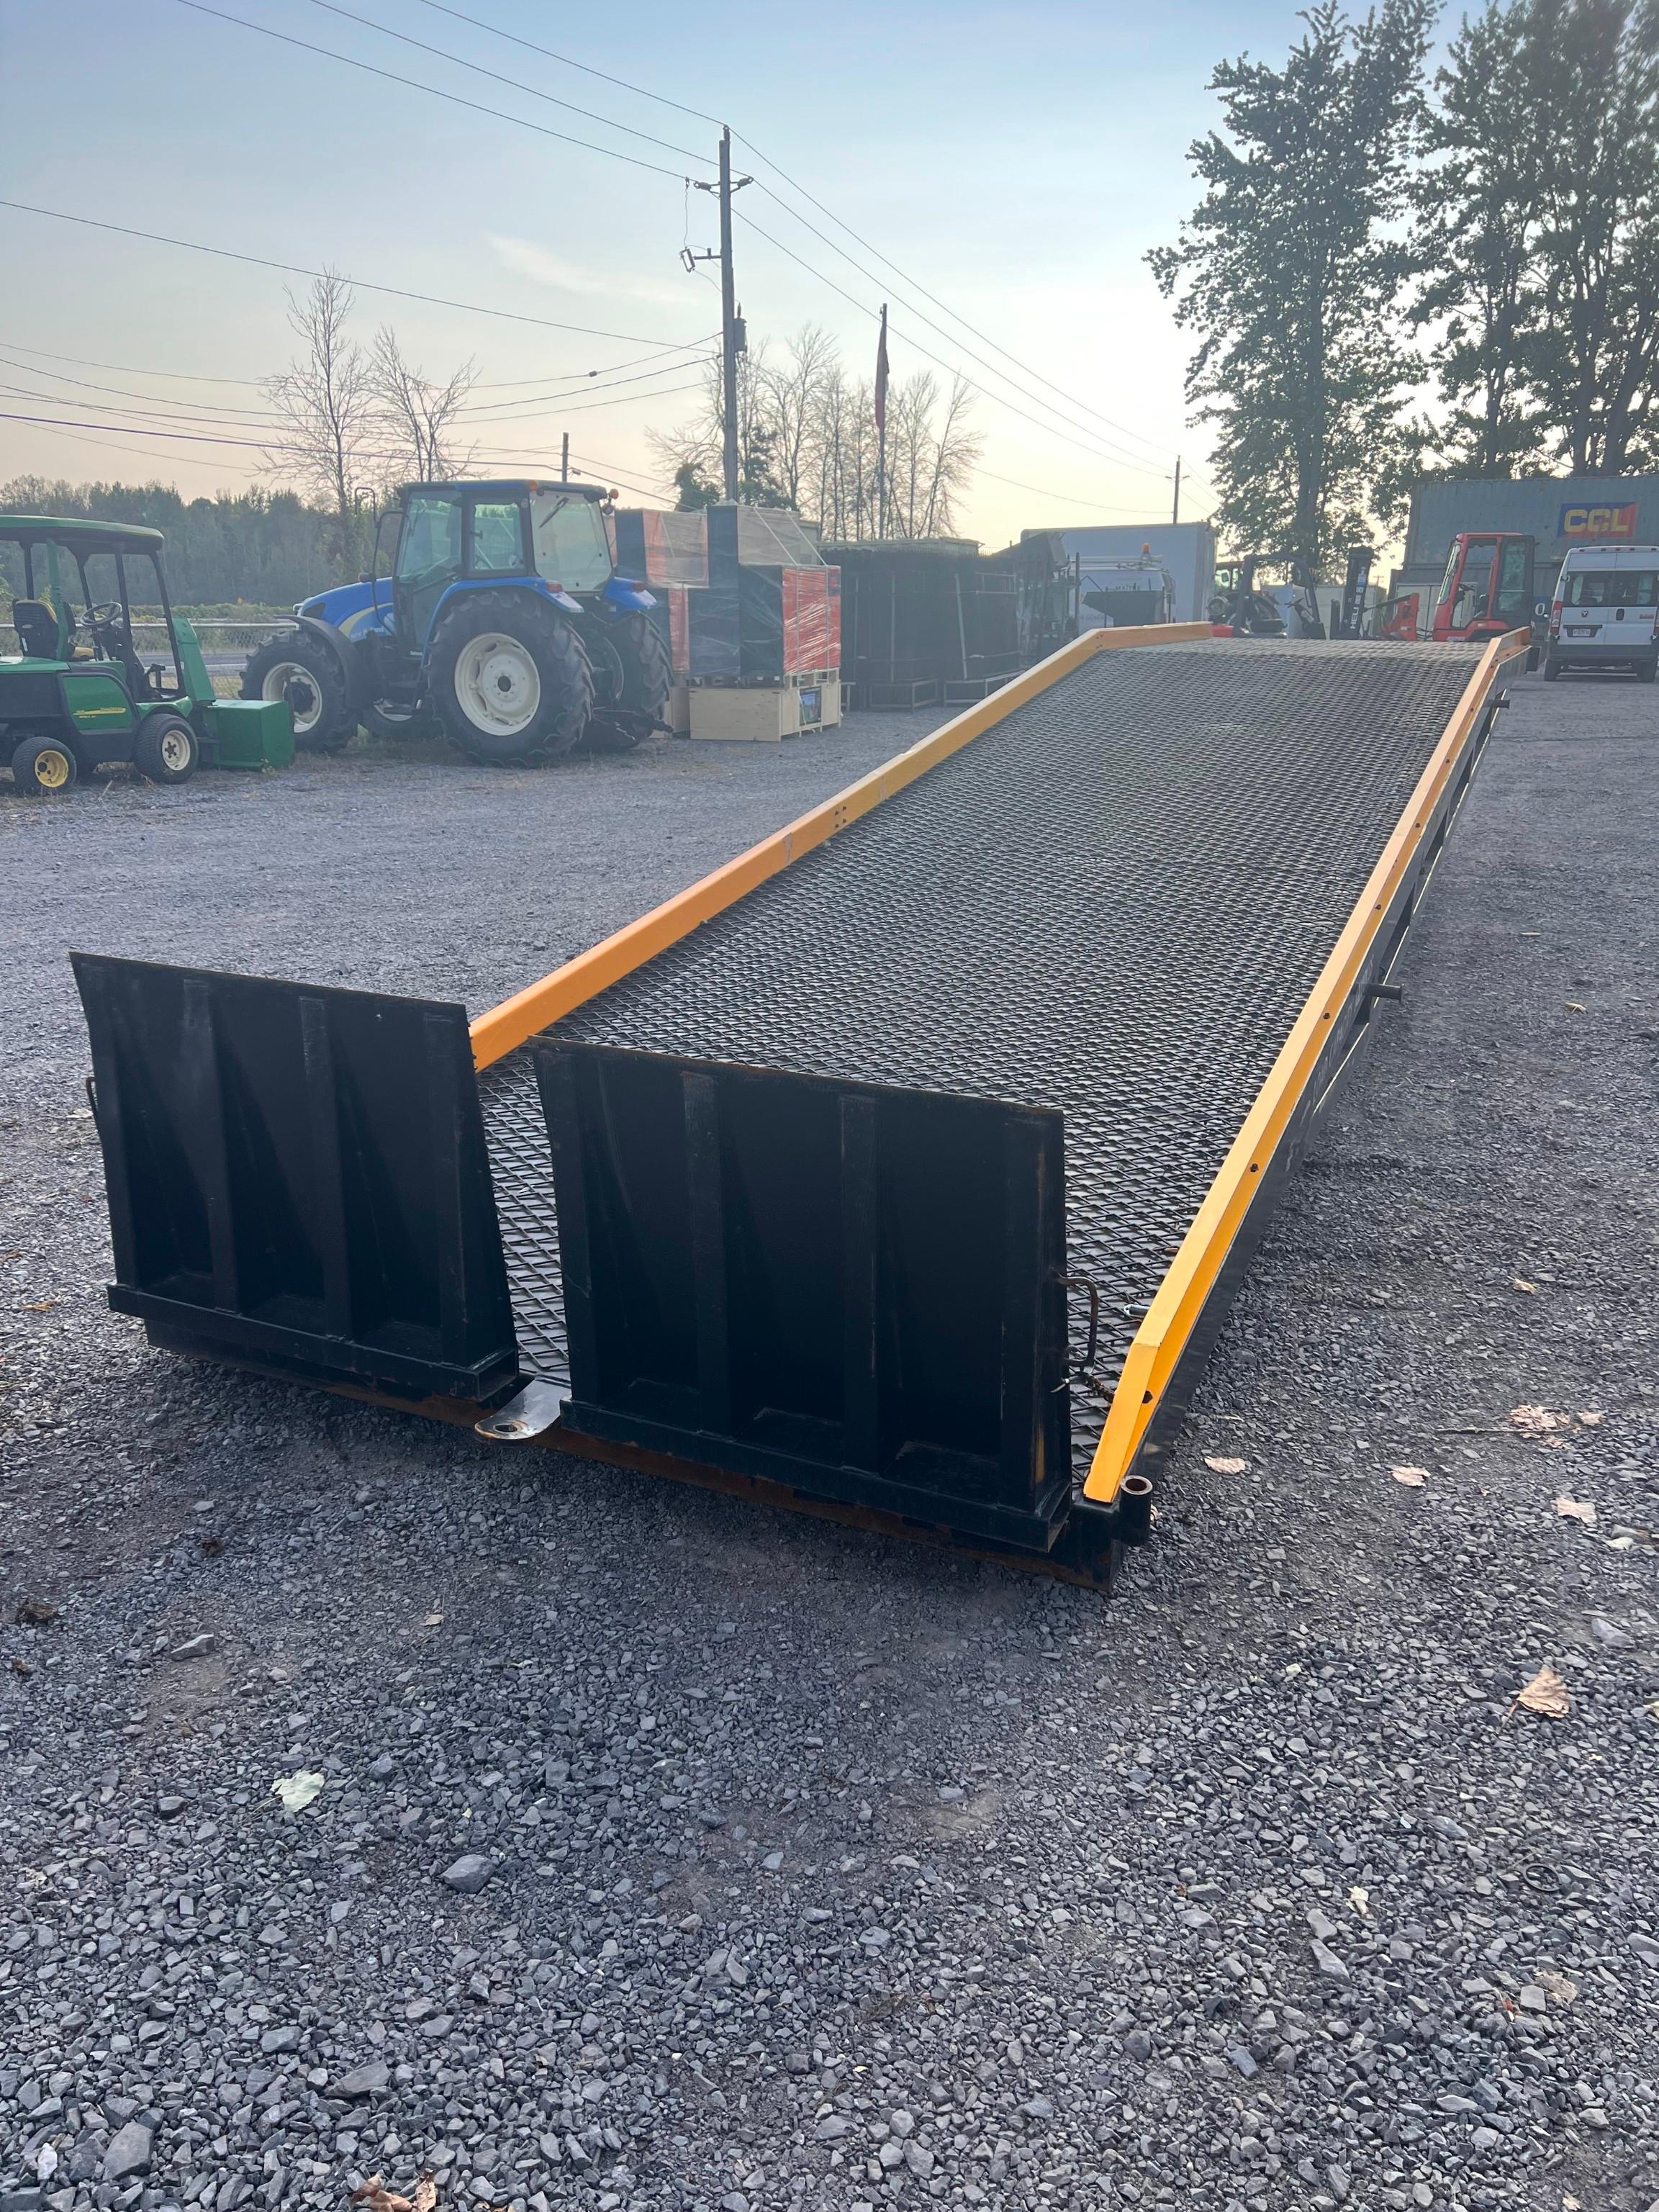 NEW SUPPORT EQUIPMENT NEW 22,000LBS LOADING RAMP, equipped with adjustable working height 48'' to